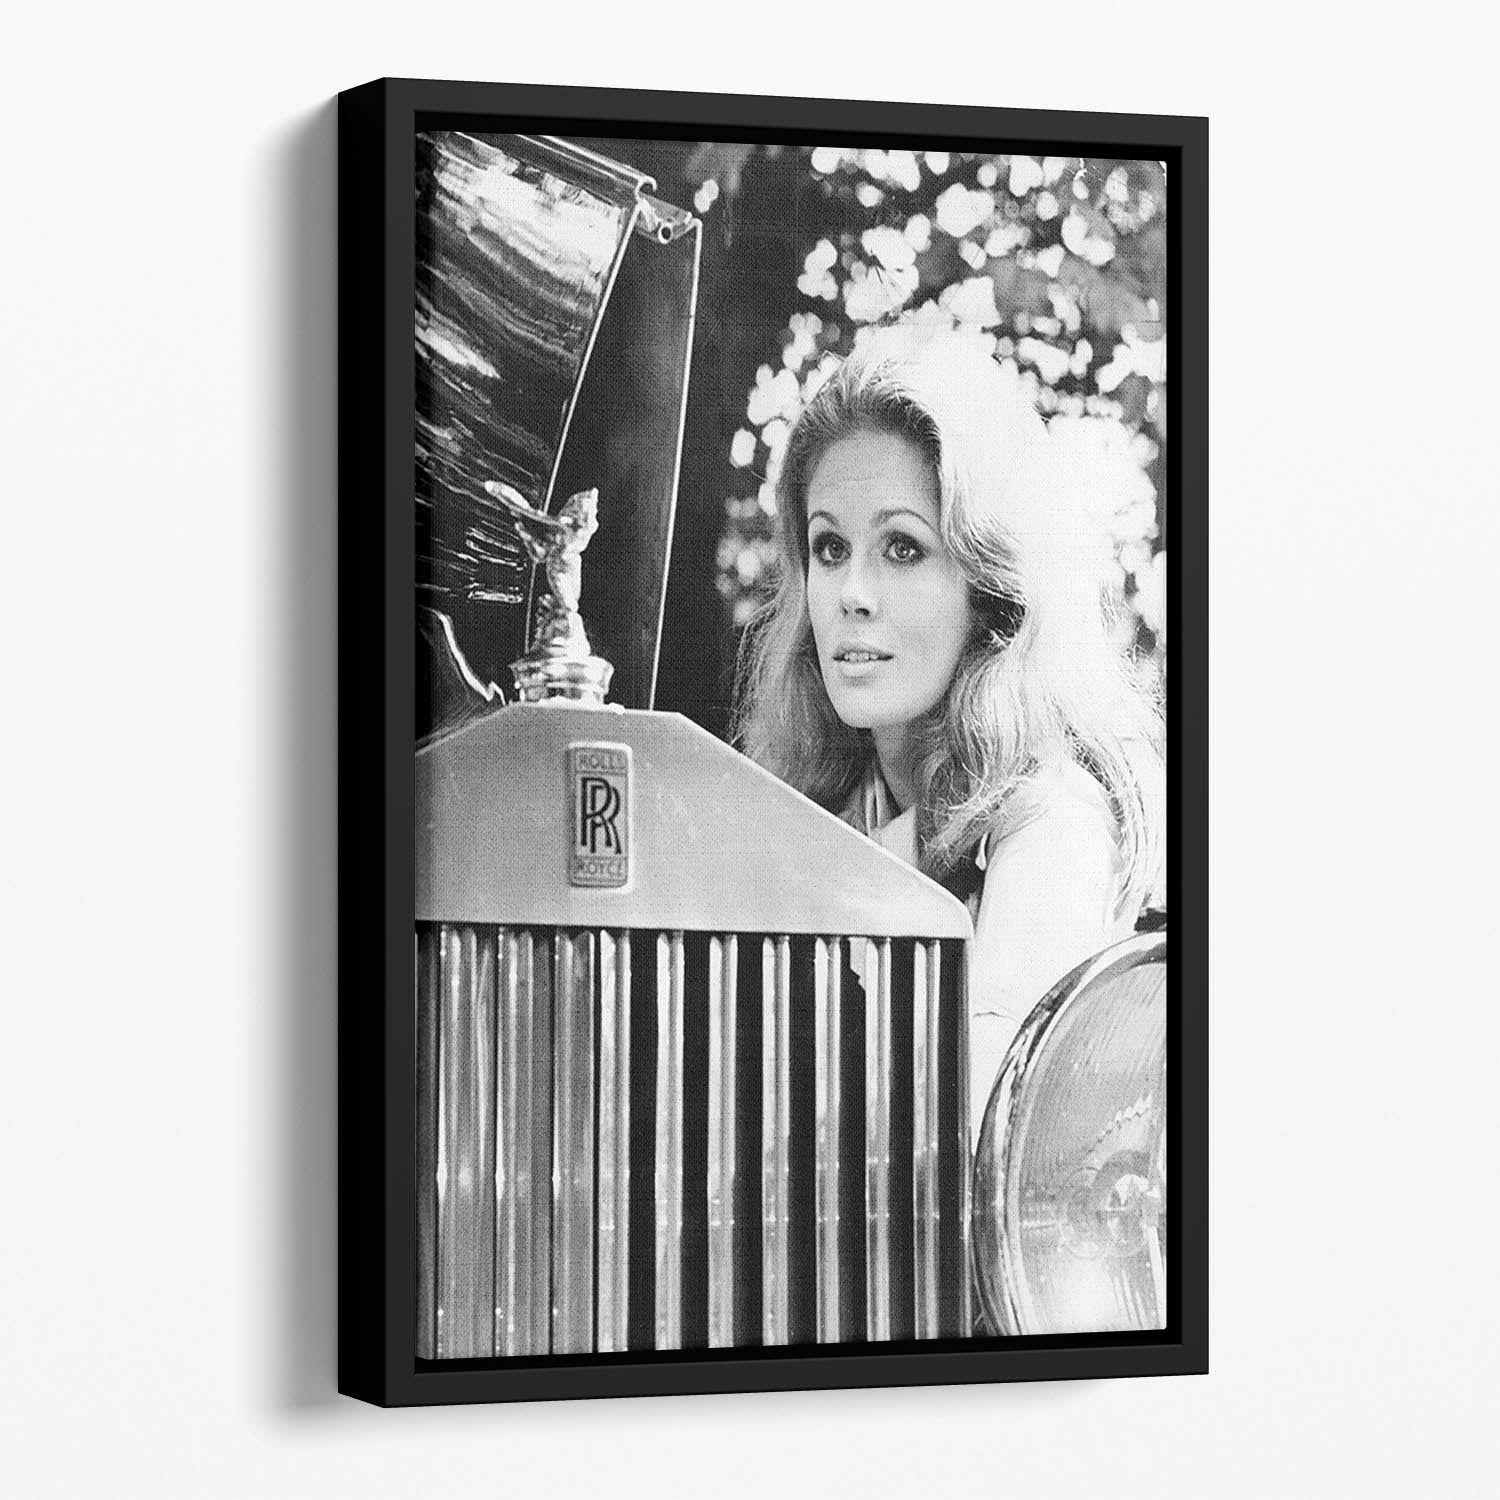 Joanna Lumley with her Rolls Royce Floating Framed Canvas